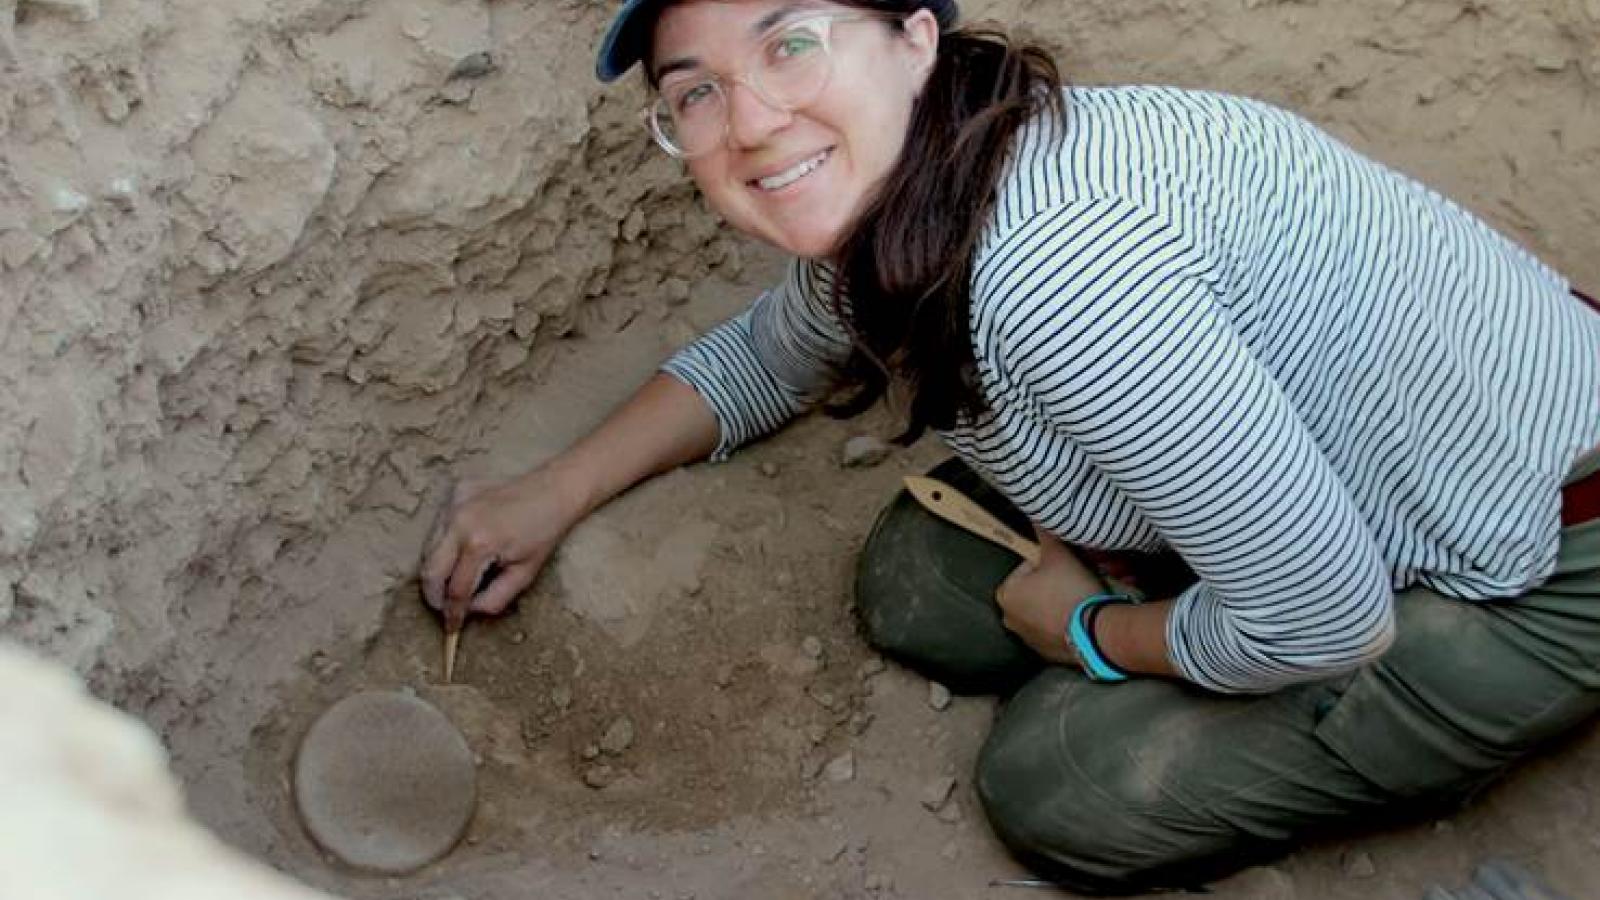 Archaeological excavation in Azerbaijan by PhD student Selin Nugent